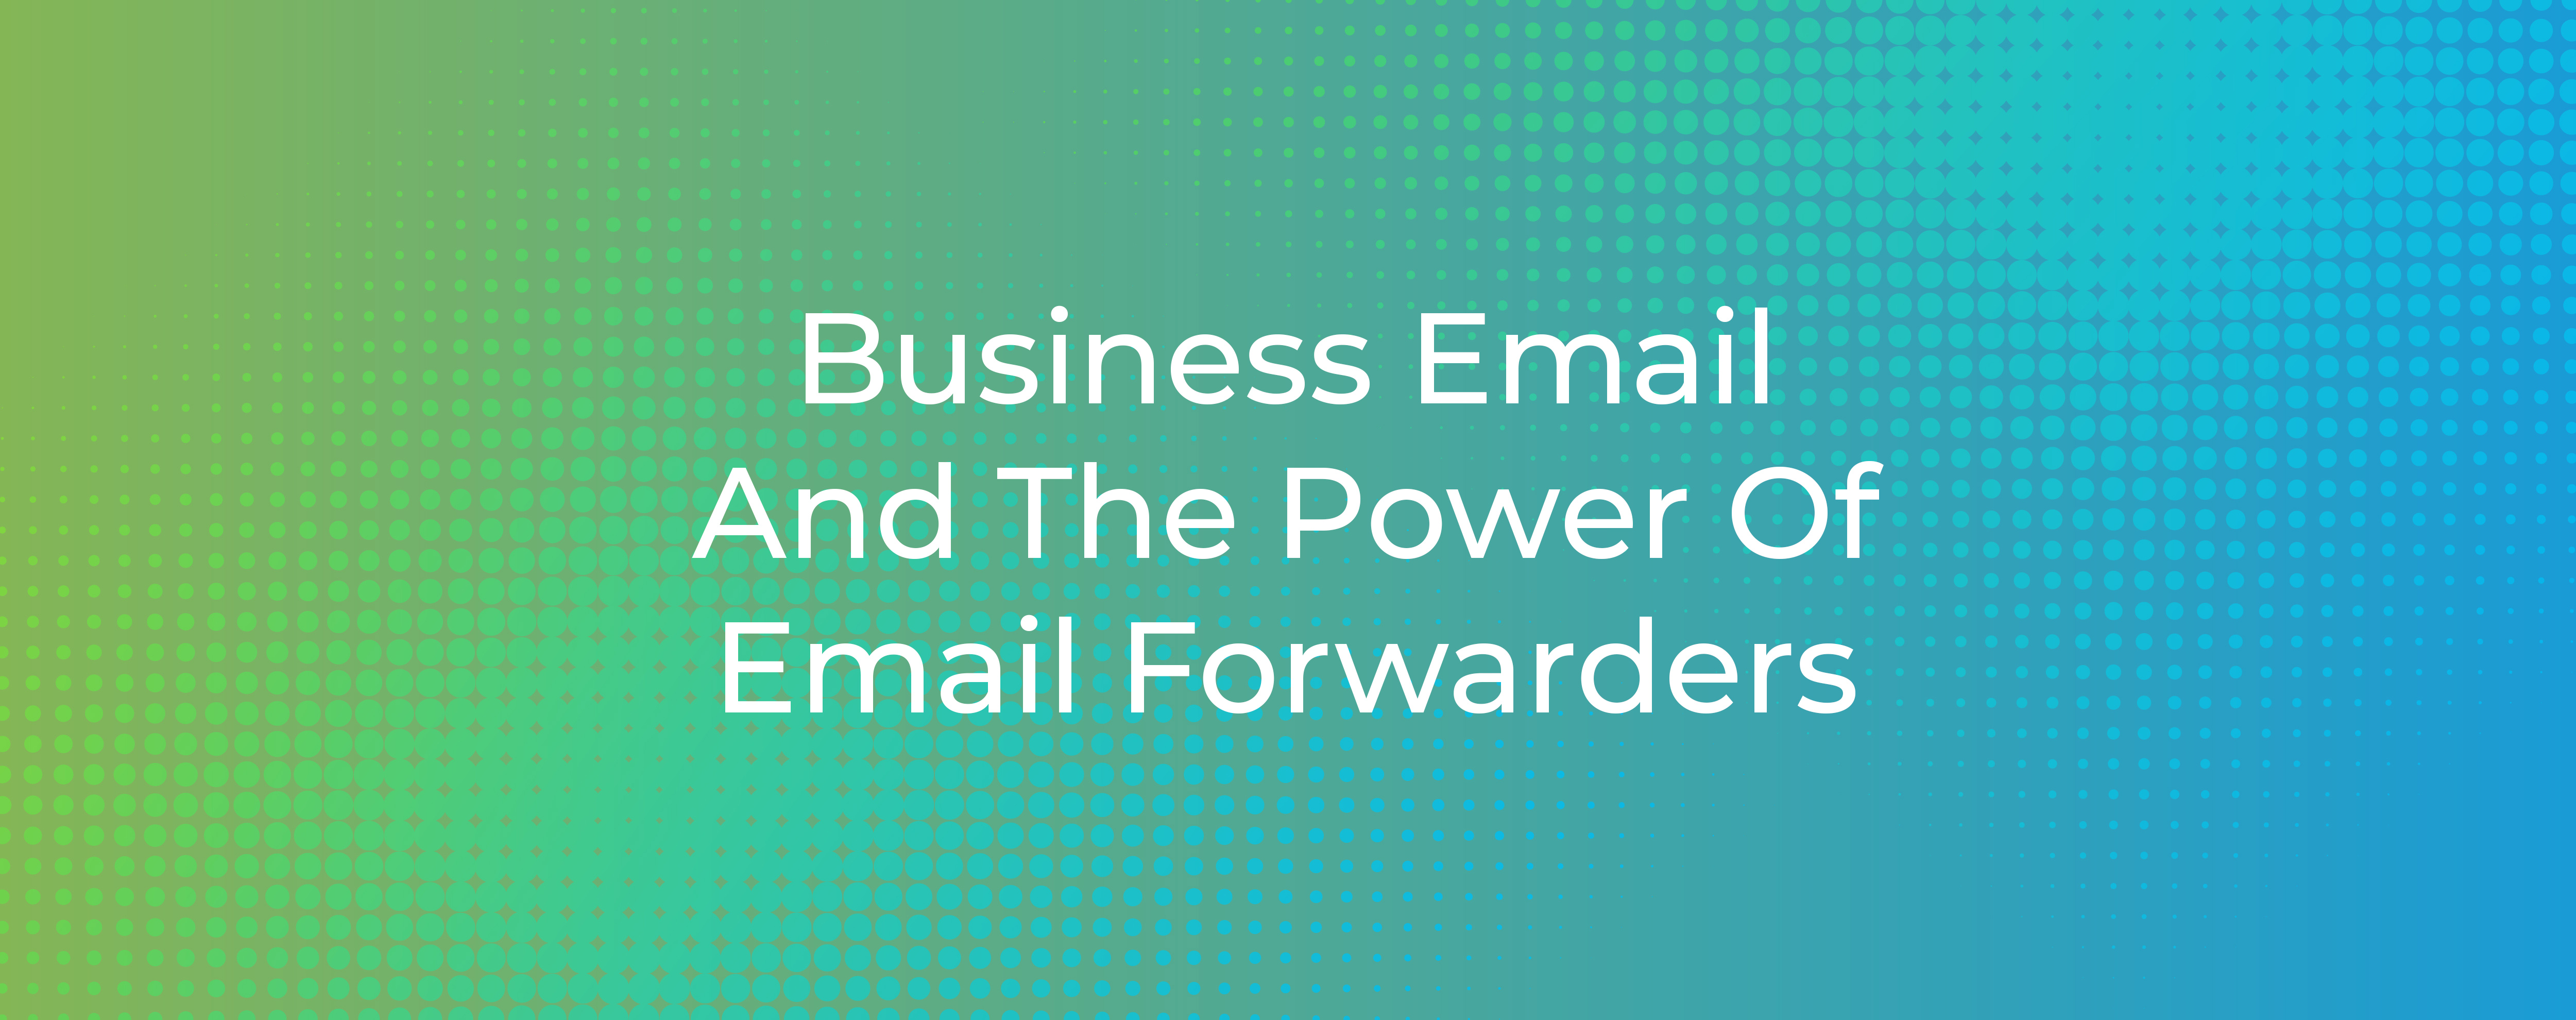 Business Email Forwarders